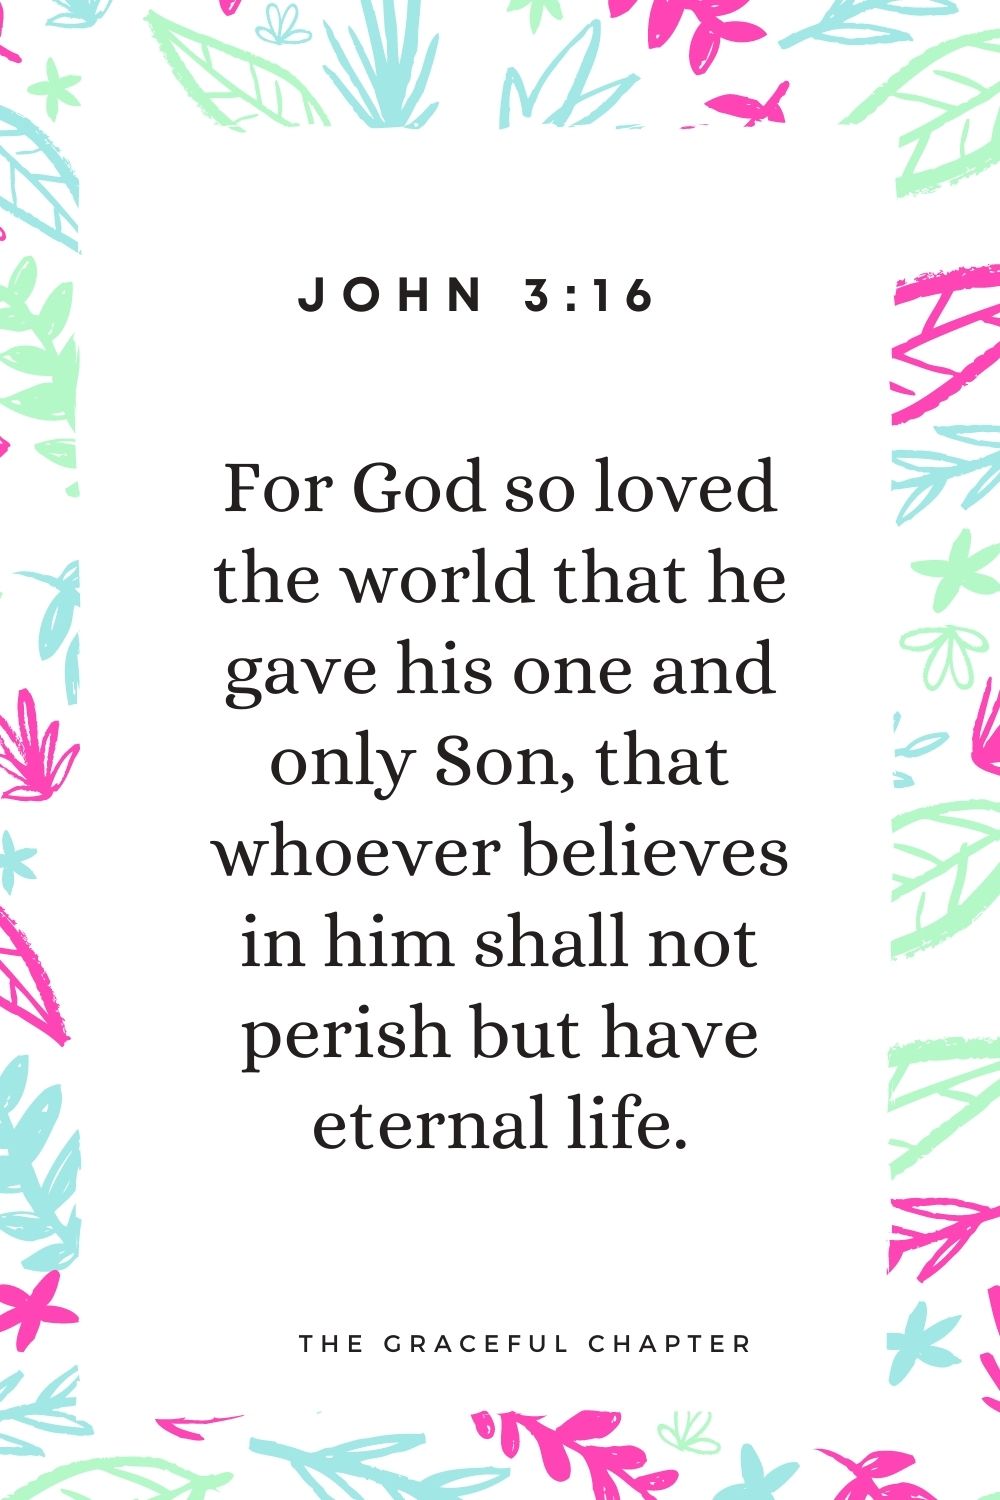 For God so loved the world that he gave his one and only Son, that whoever believes in him shall not perish but have eternal life. John 3:16